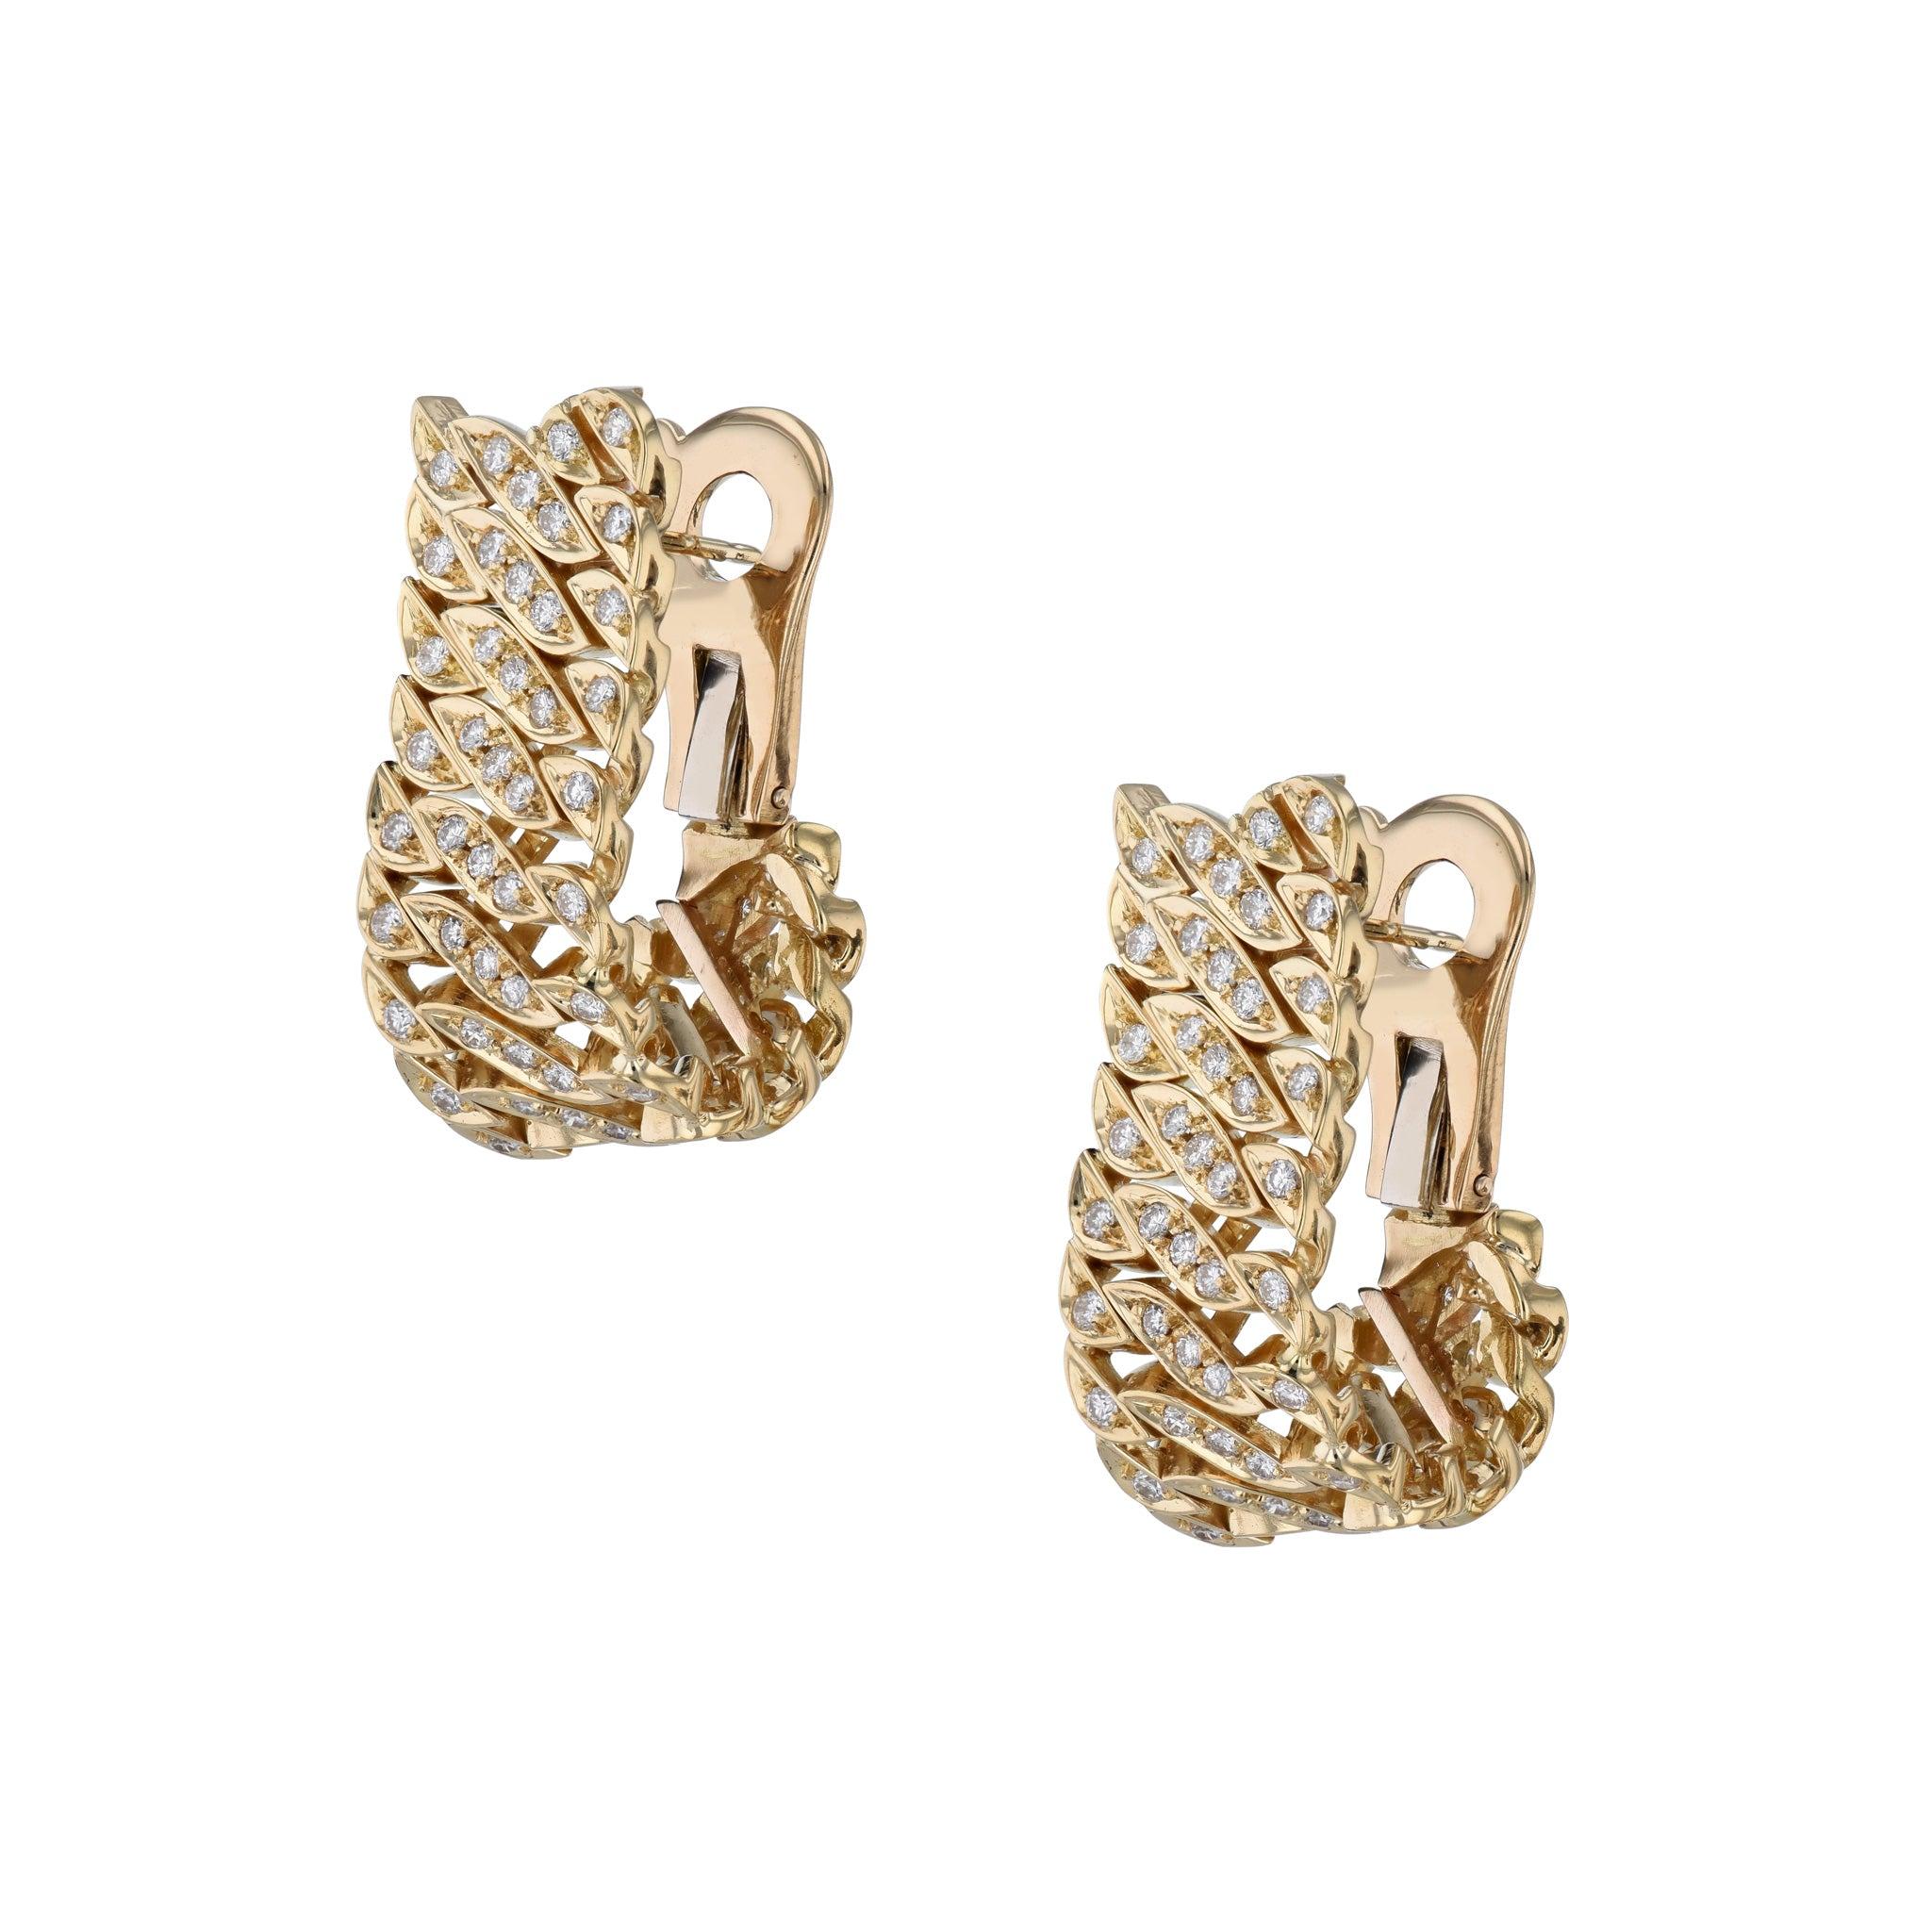 Gleaming with elegance, these magnificent 18K yellow gold estate earrings feature 130 dazzling diamonds. With French hallmarks, these enthralling earrings provide a timeless luxury.
Yellow Gold and Diamond Estate Earrings
18kt. Yellow Gold 
130